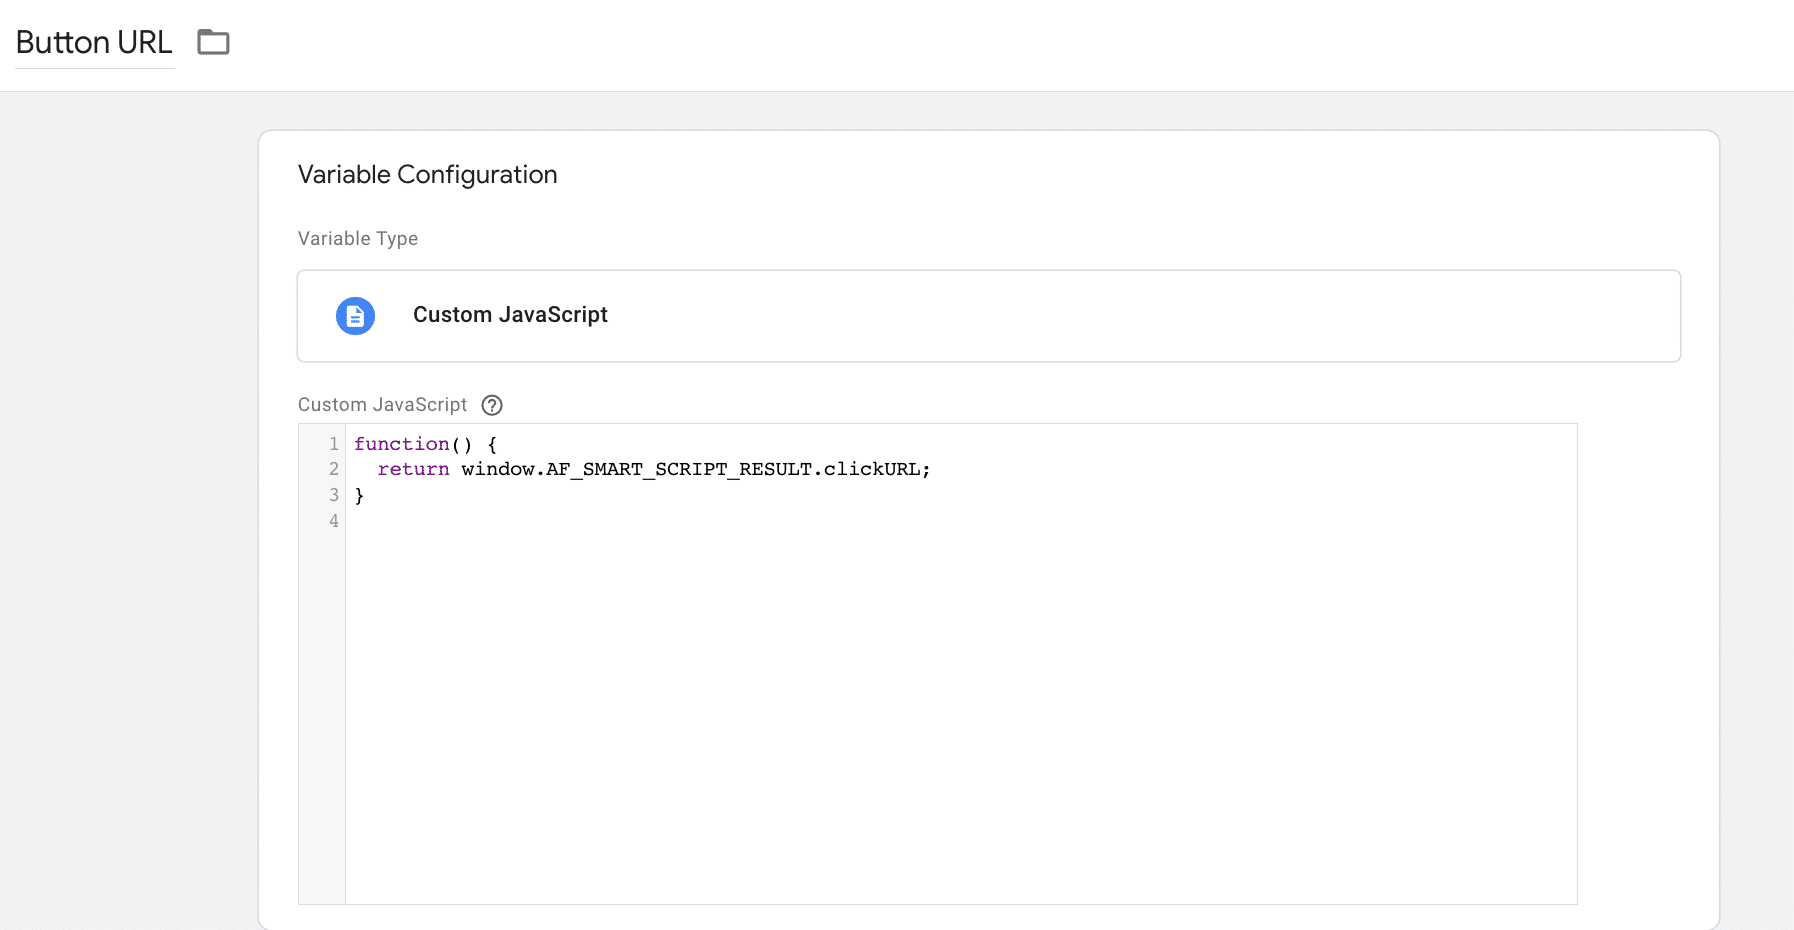 Created a variable from custom javascript that will return value from AF_SMART_SCRIPT_RESULT.